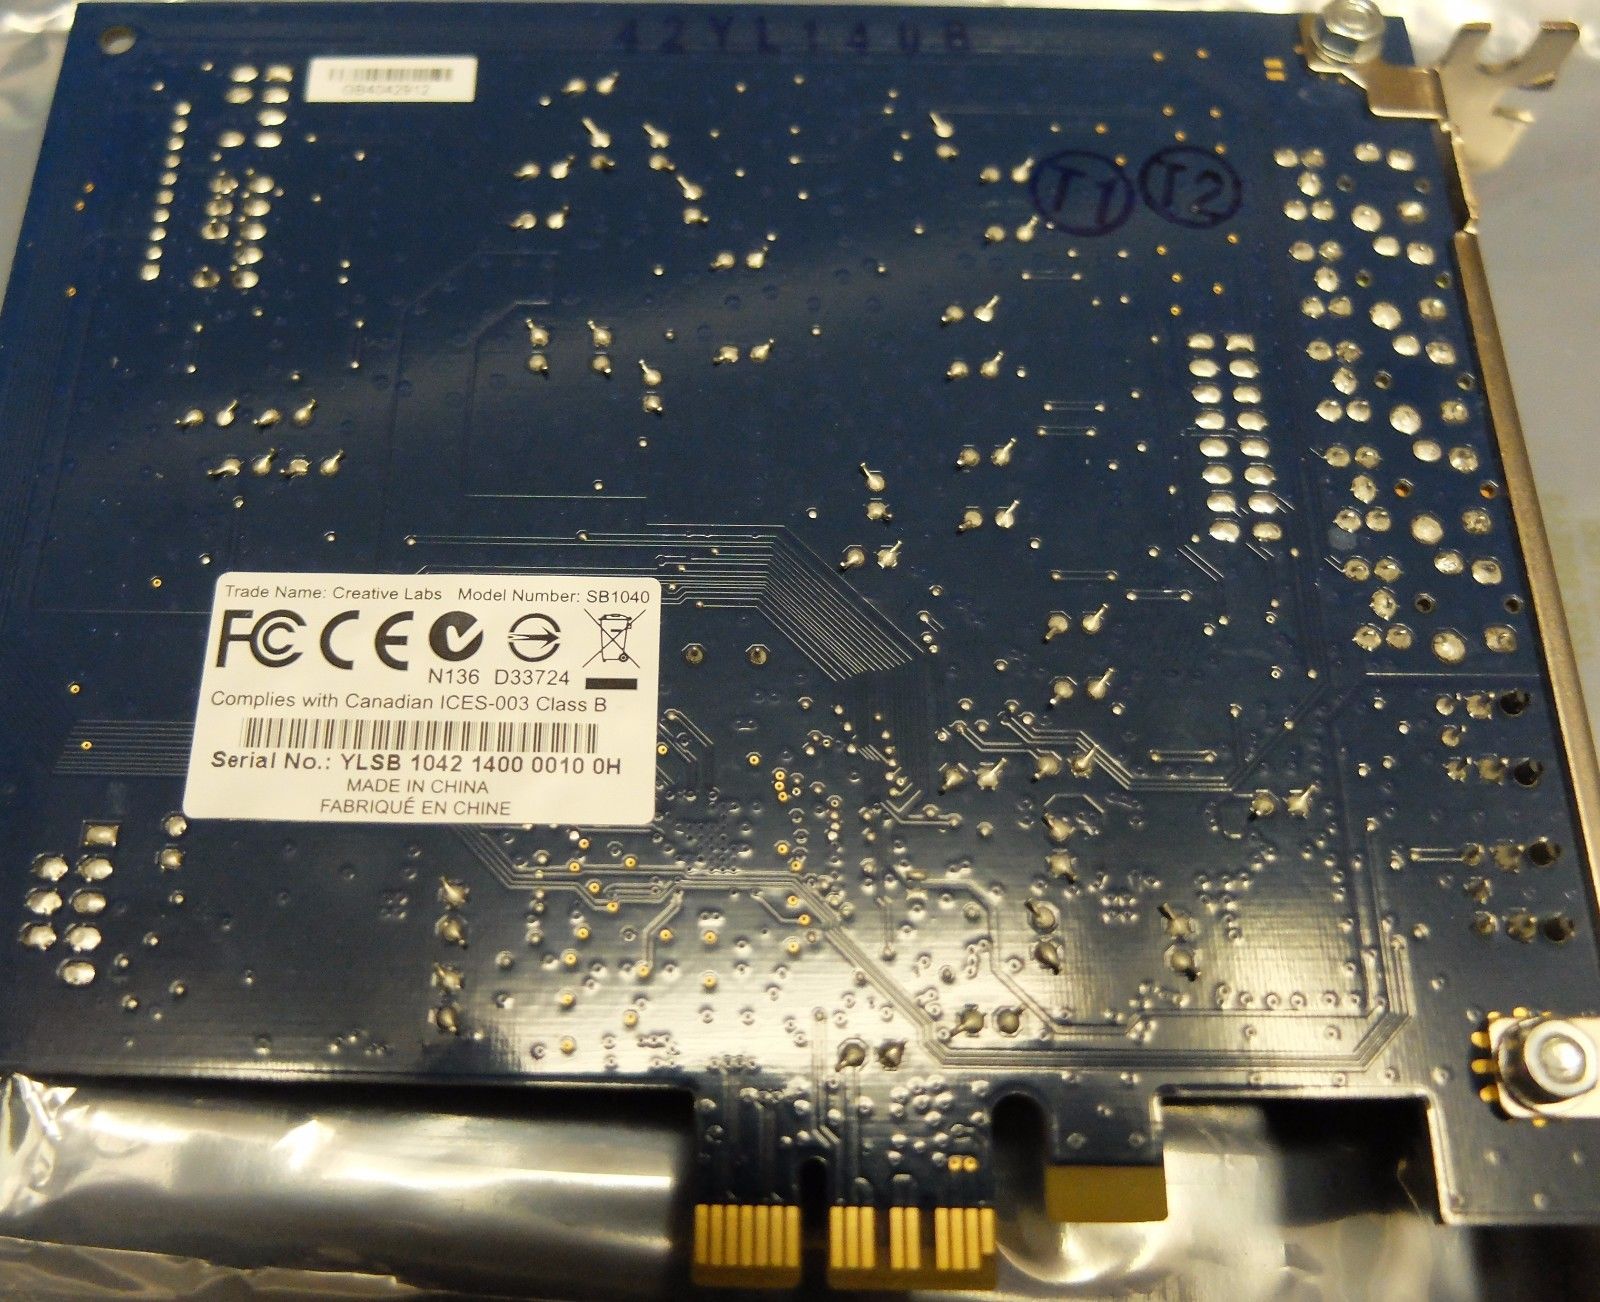 Intel canada ices 003 class b motherboard drivers download